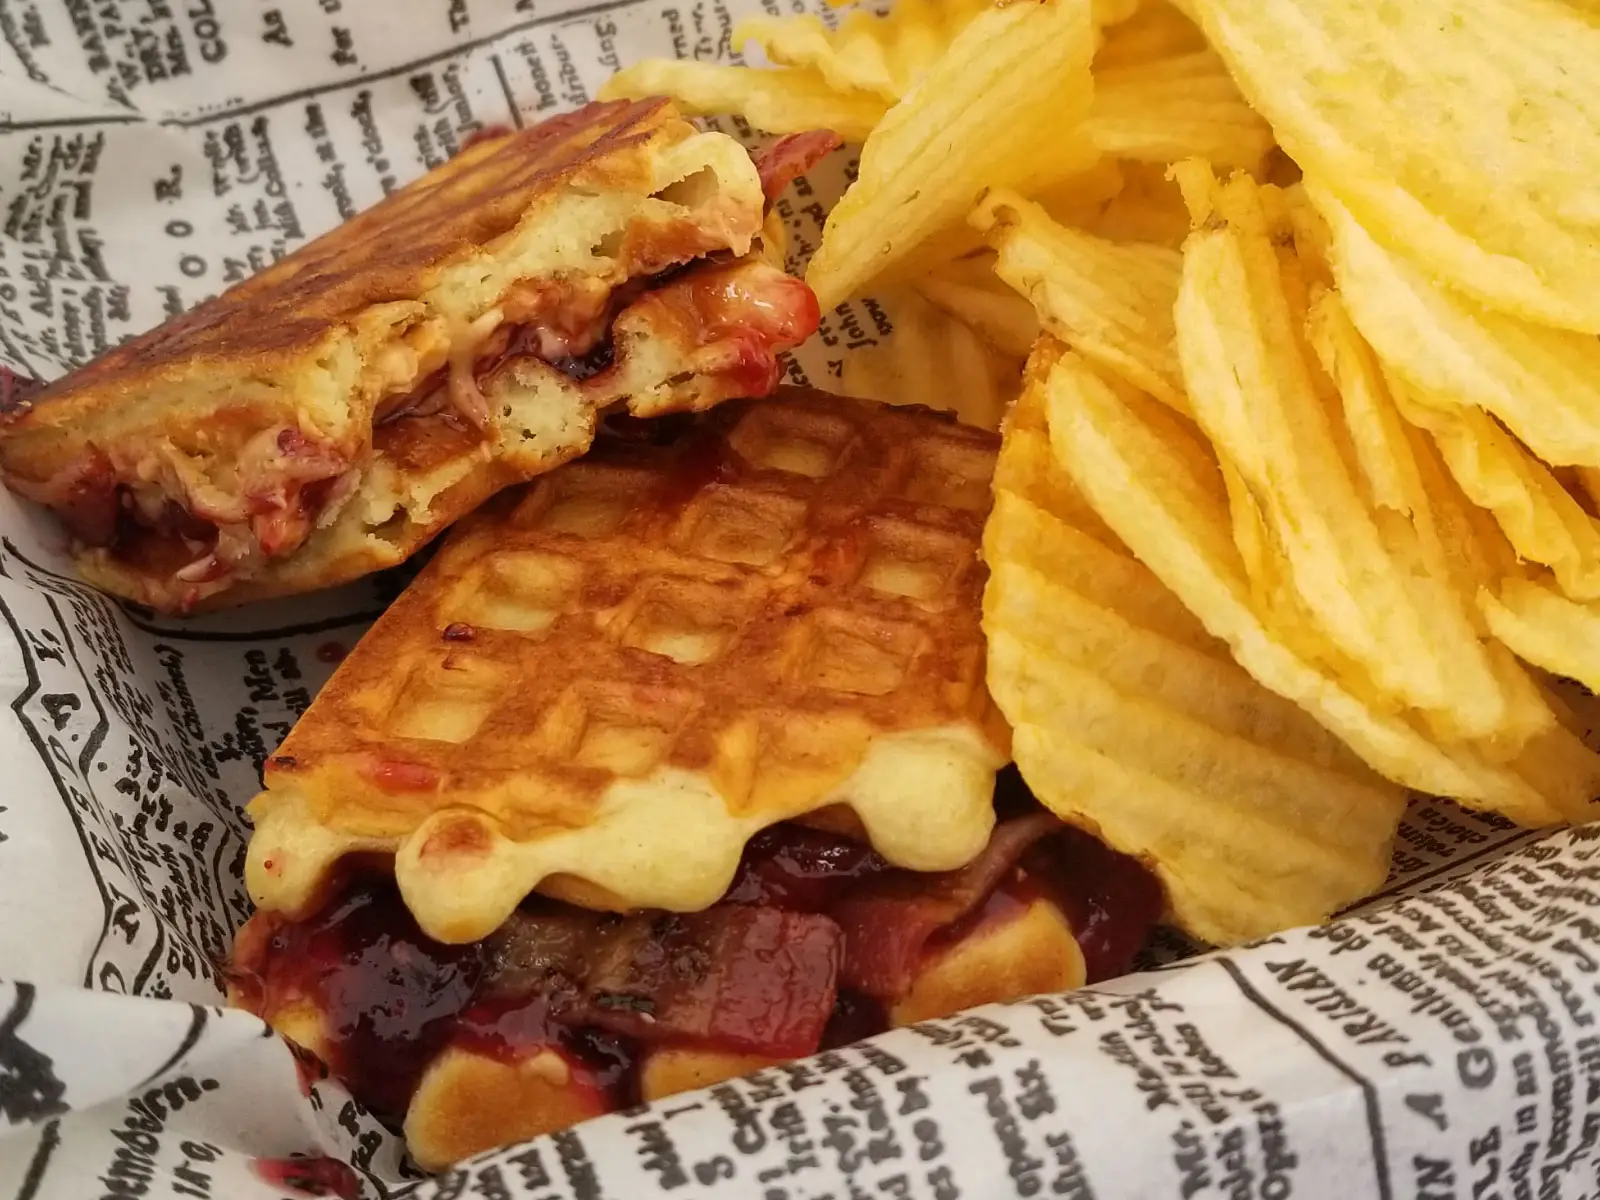 A waffle sandwich with cheese and bacon, and a side of kettle chips